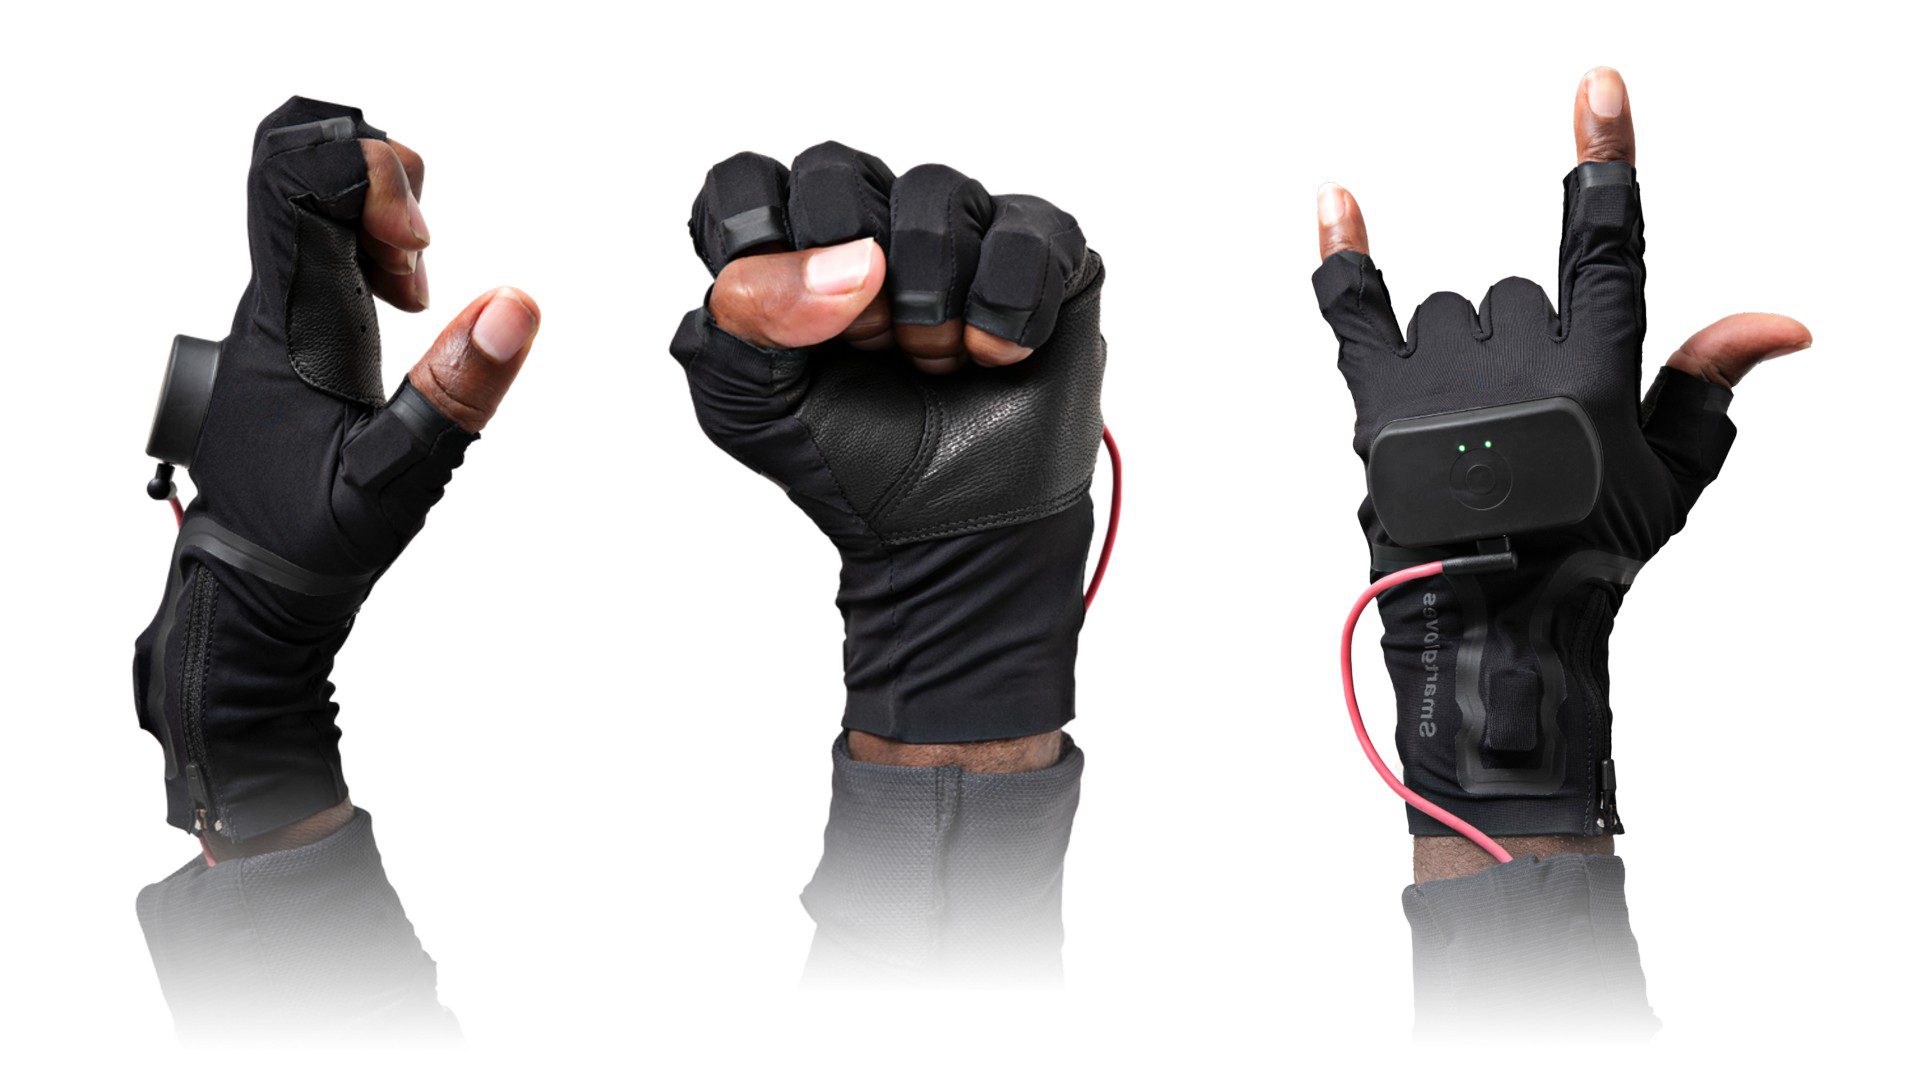 Rokoko Introduces Studio-Quality Hand and Finger Tracking Solution ‘Smartgloves’